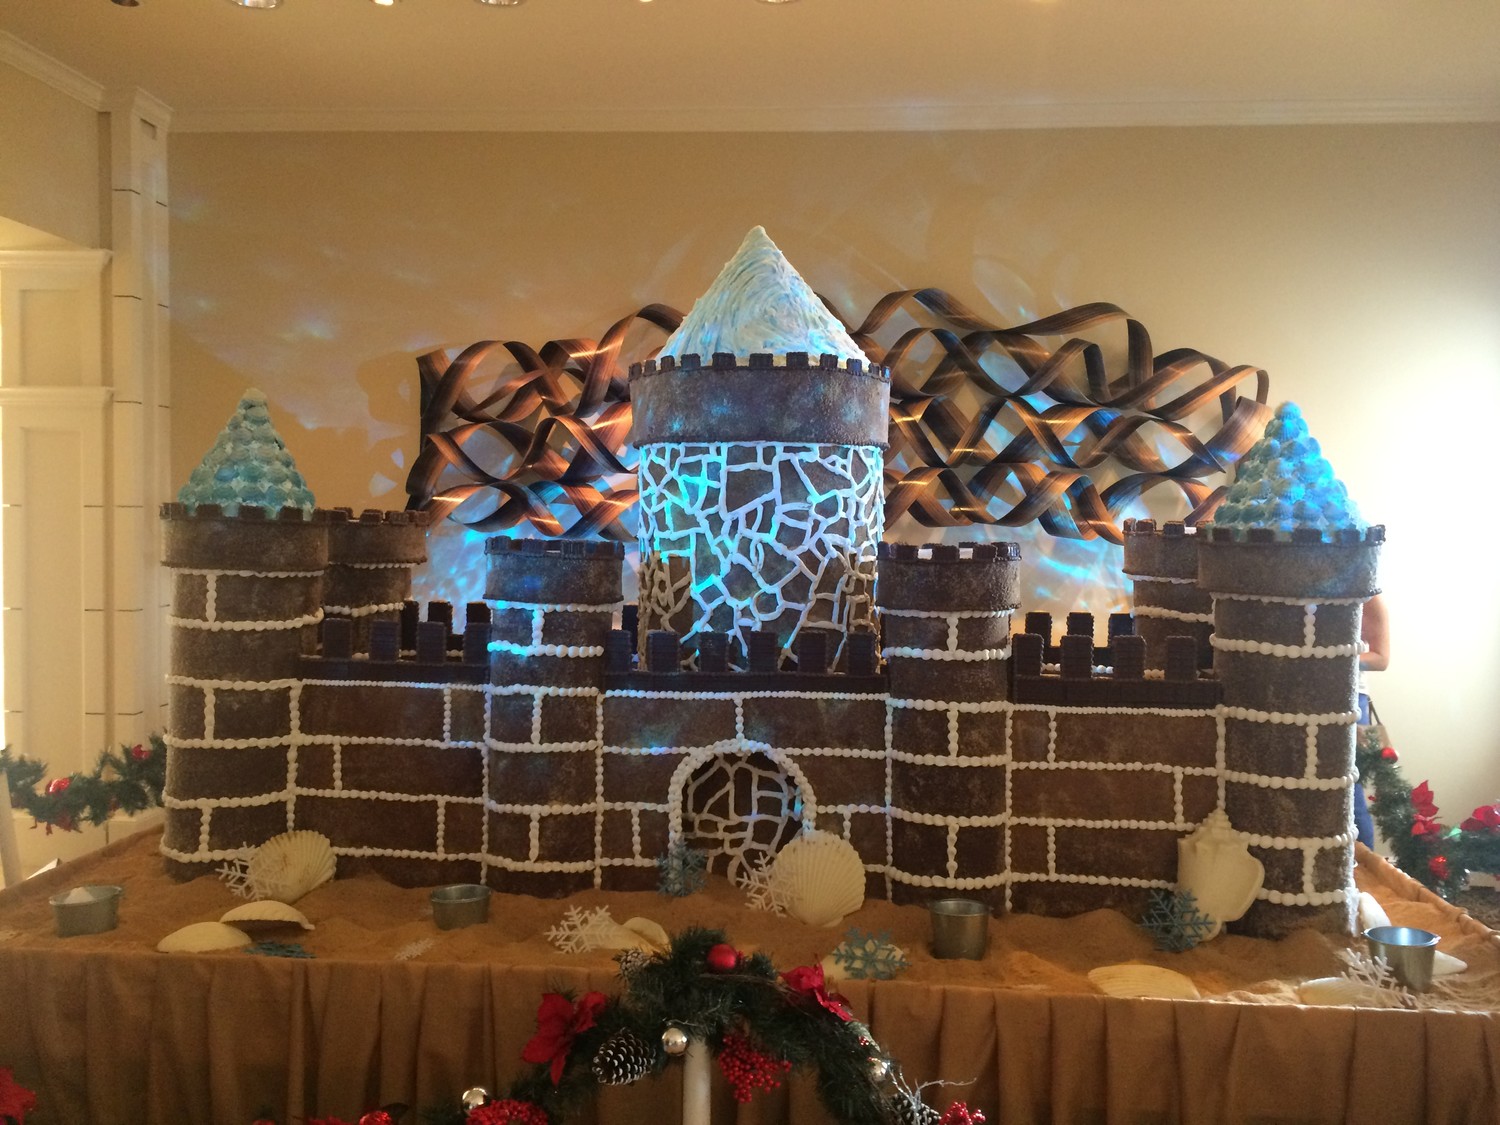 The gingerbread castle is unveiled Dec. 4 at One Ocean Resort & Spa.